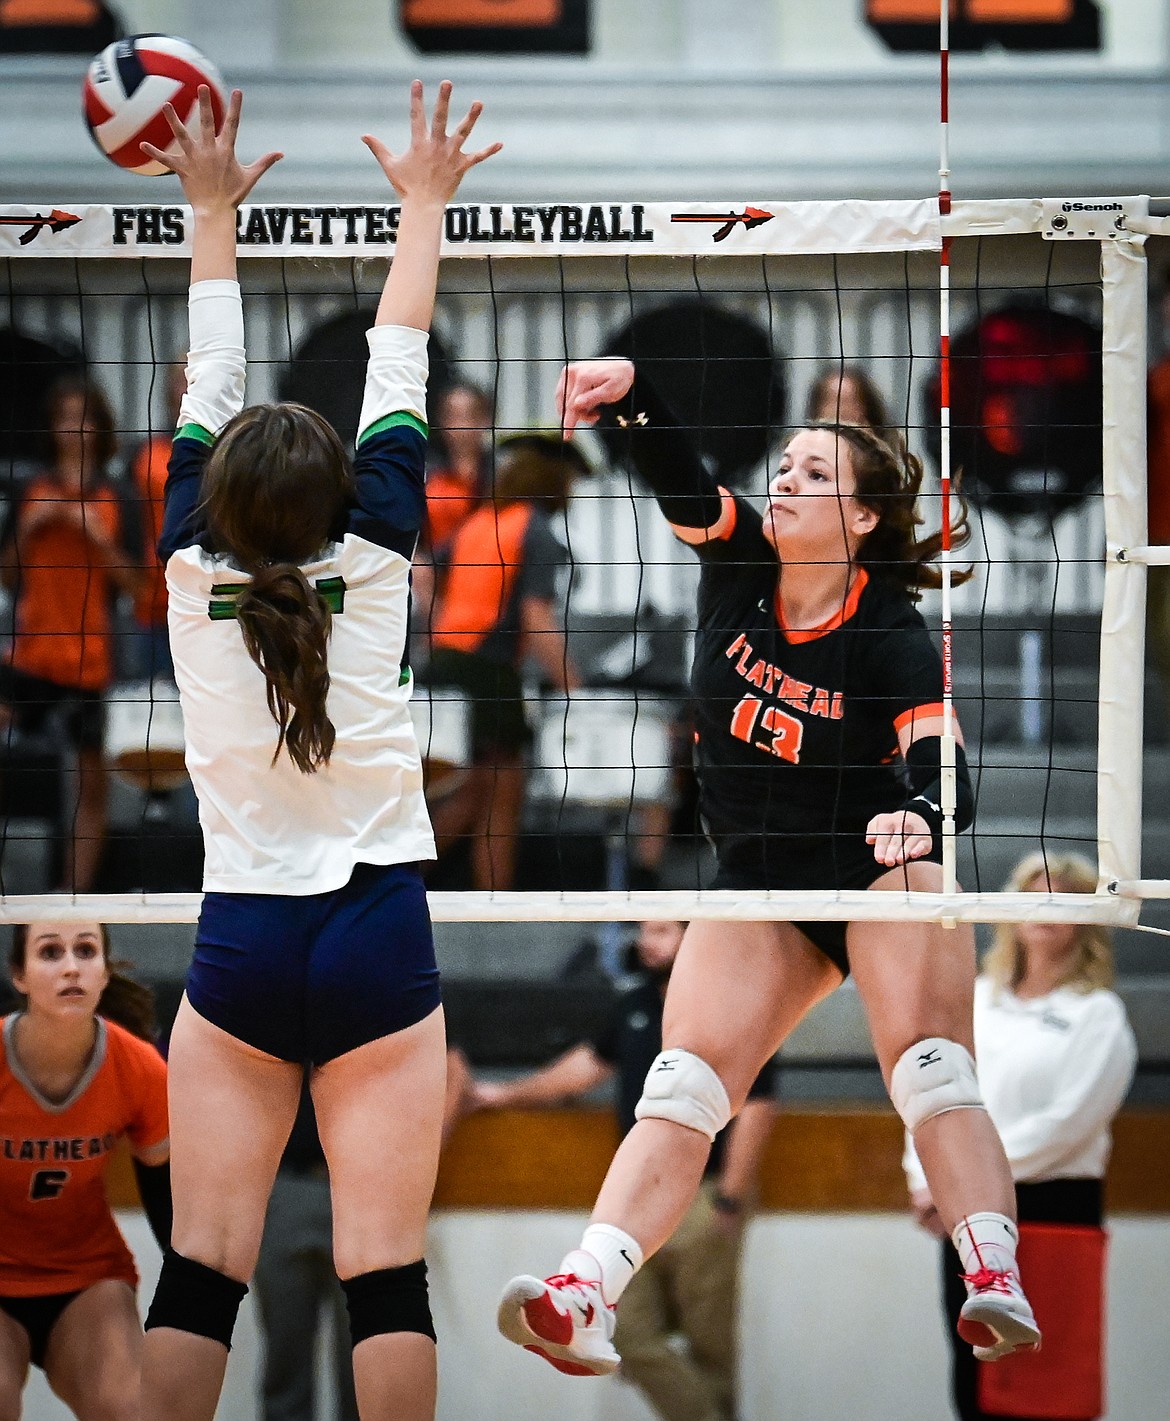 Flathead's Olive Lyngholm (13) goes up for a kill against Glacier during crosstown volleyball at Flathead High School on Thursday, Sept. 29. (Casey Kreider/Daily Inter Lake)